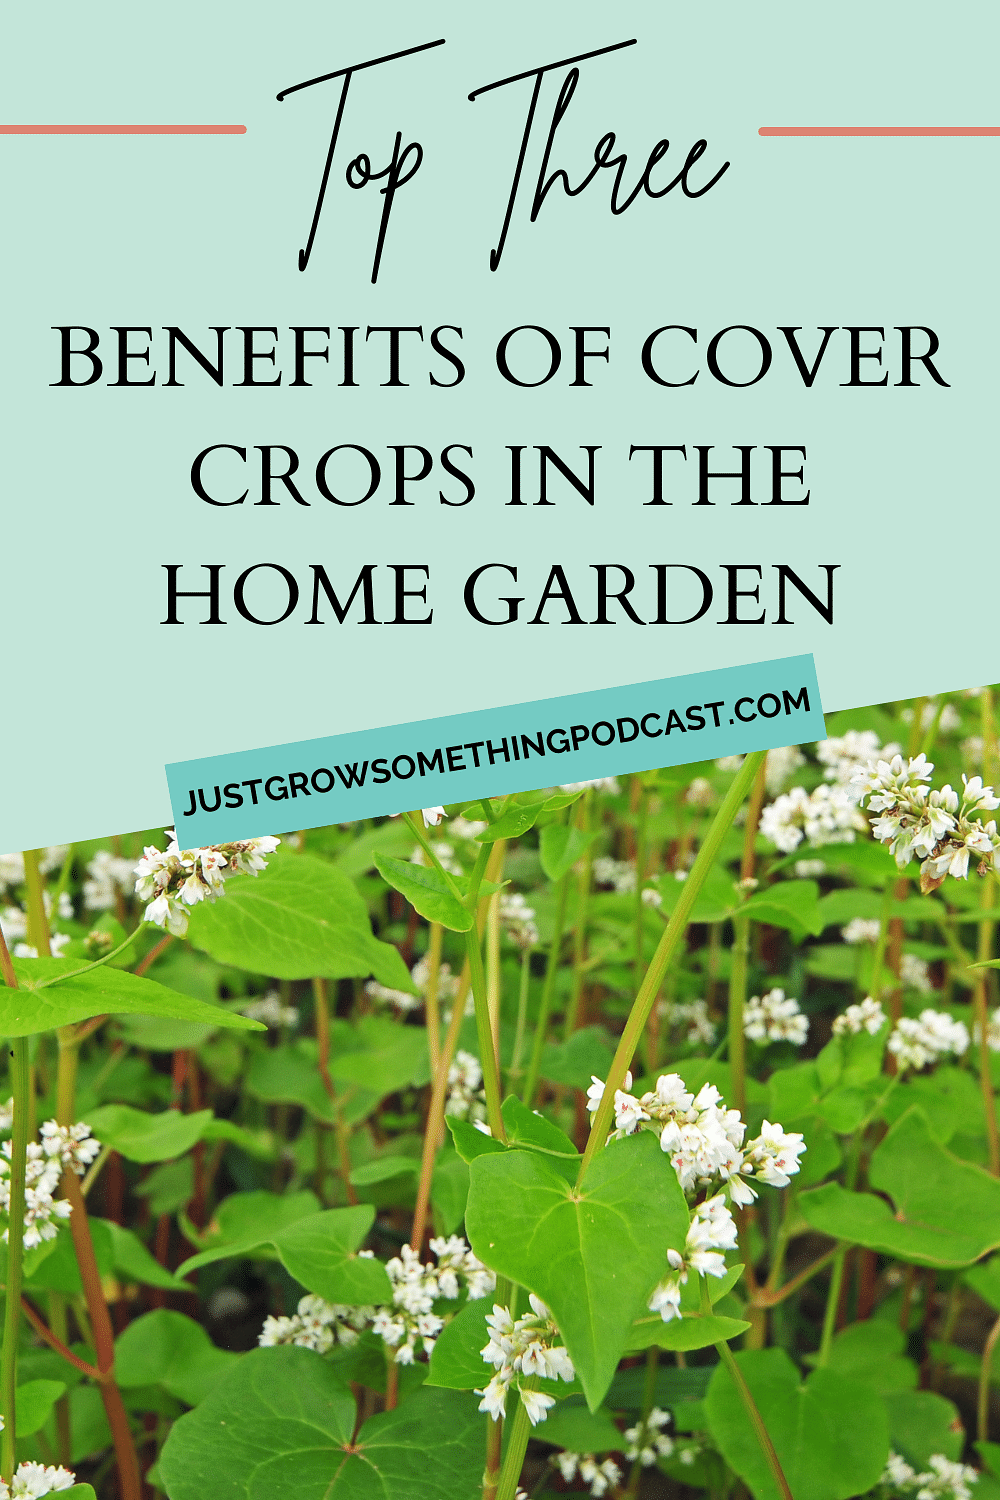 Top Three Benefits to Using Cover Crops in the Home Garden